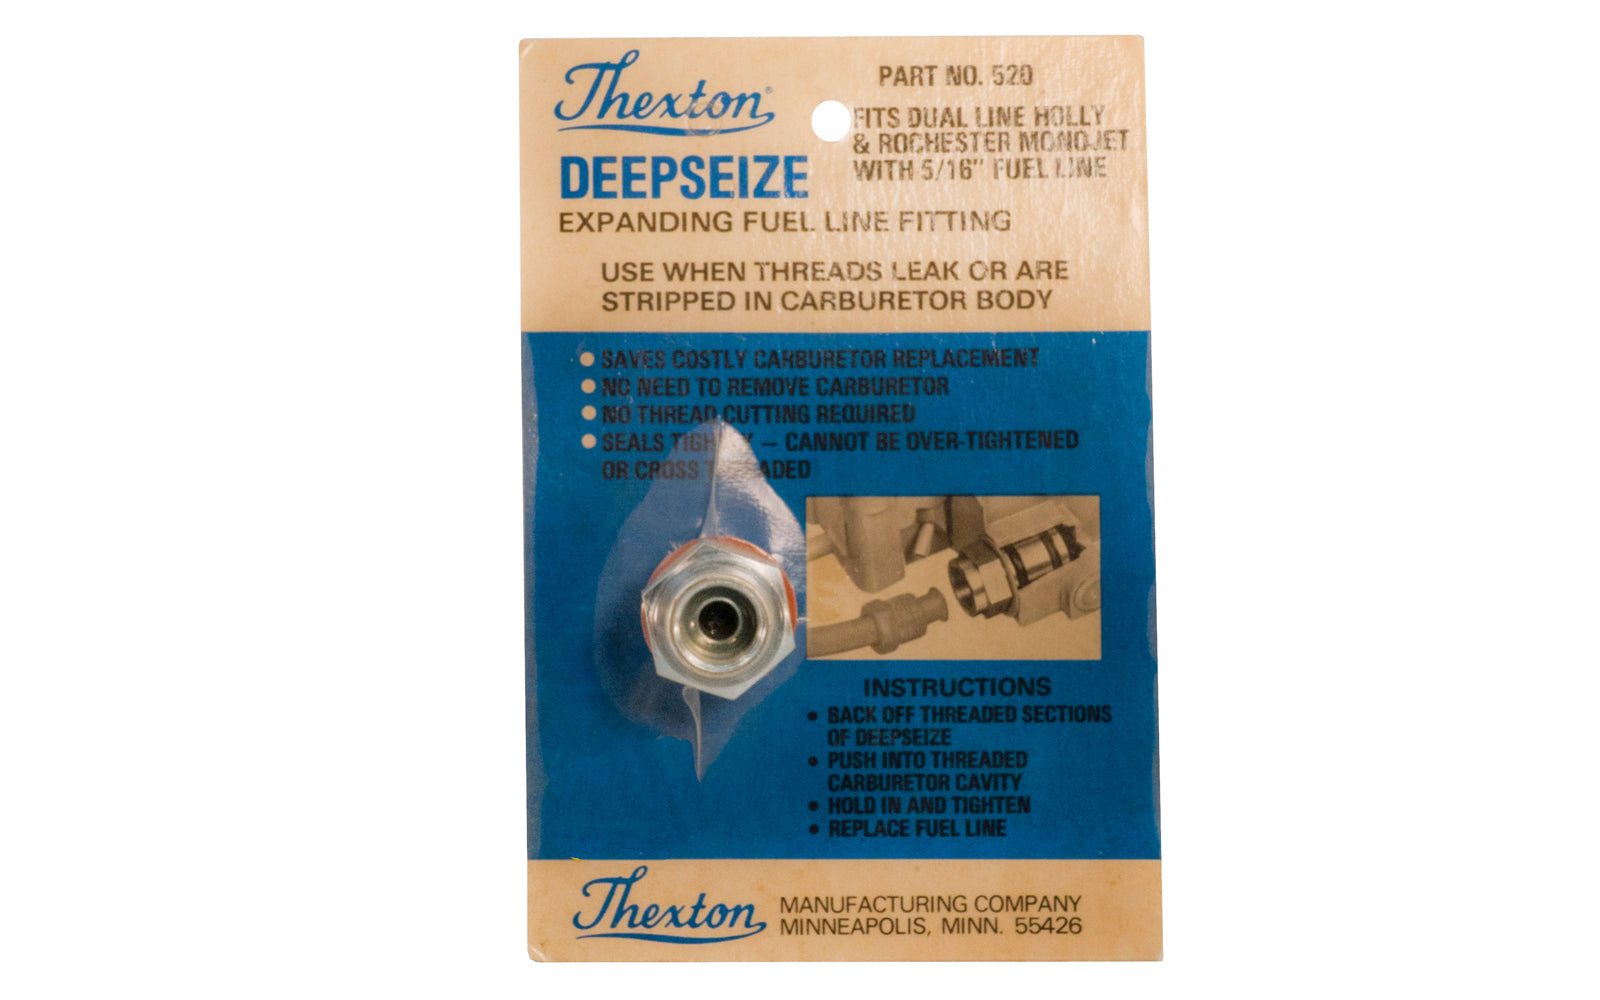 Thexton DeepSeize Expanding Fuel Line Fitting - Fits Dial Line Holly & Rochester MonoJet with 5/16" Fuel Line